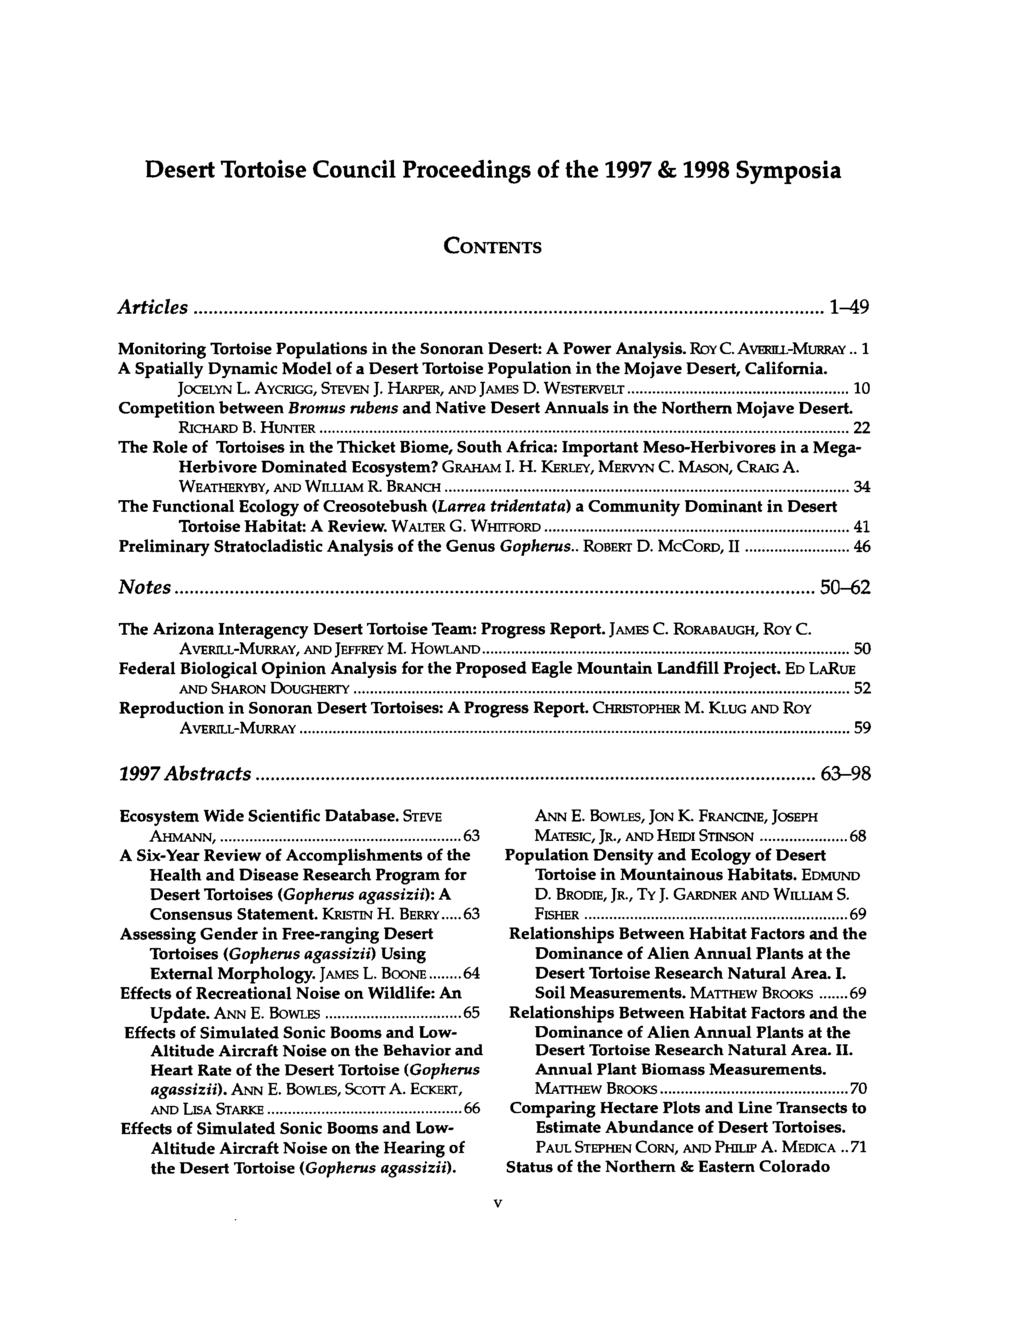 Desert Tortoise Council Proceedings of the 1997 8c 1998 Symposia CONTENTS Articles. 1&9 Monitoring Tortoise Populations in the Sonoran Desert: A Power Analysis. RoY C. AVERILL-MURRAY.